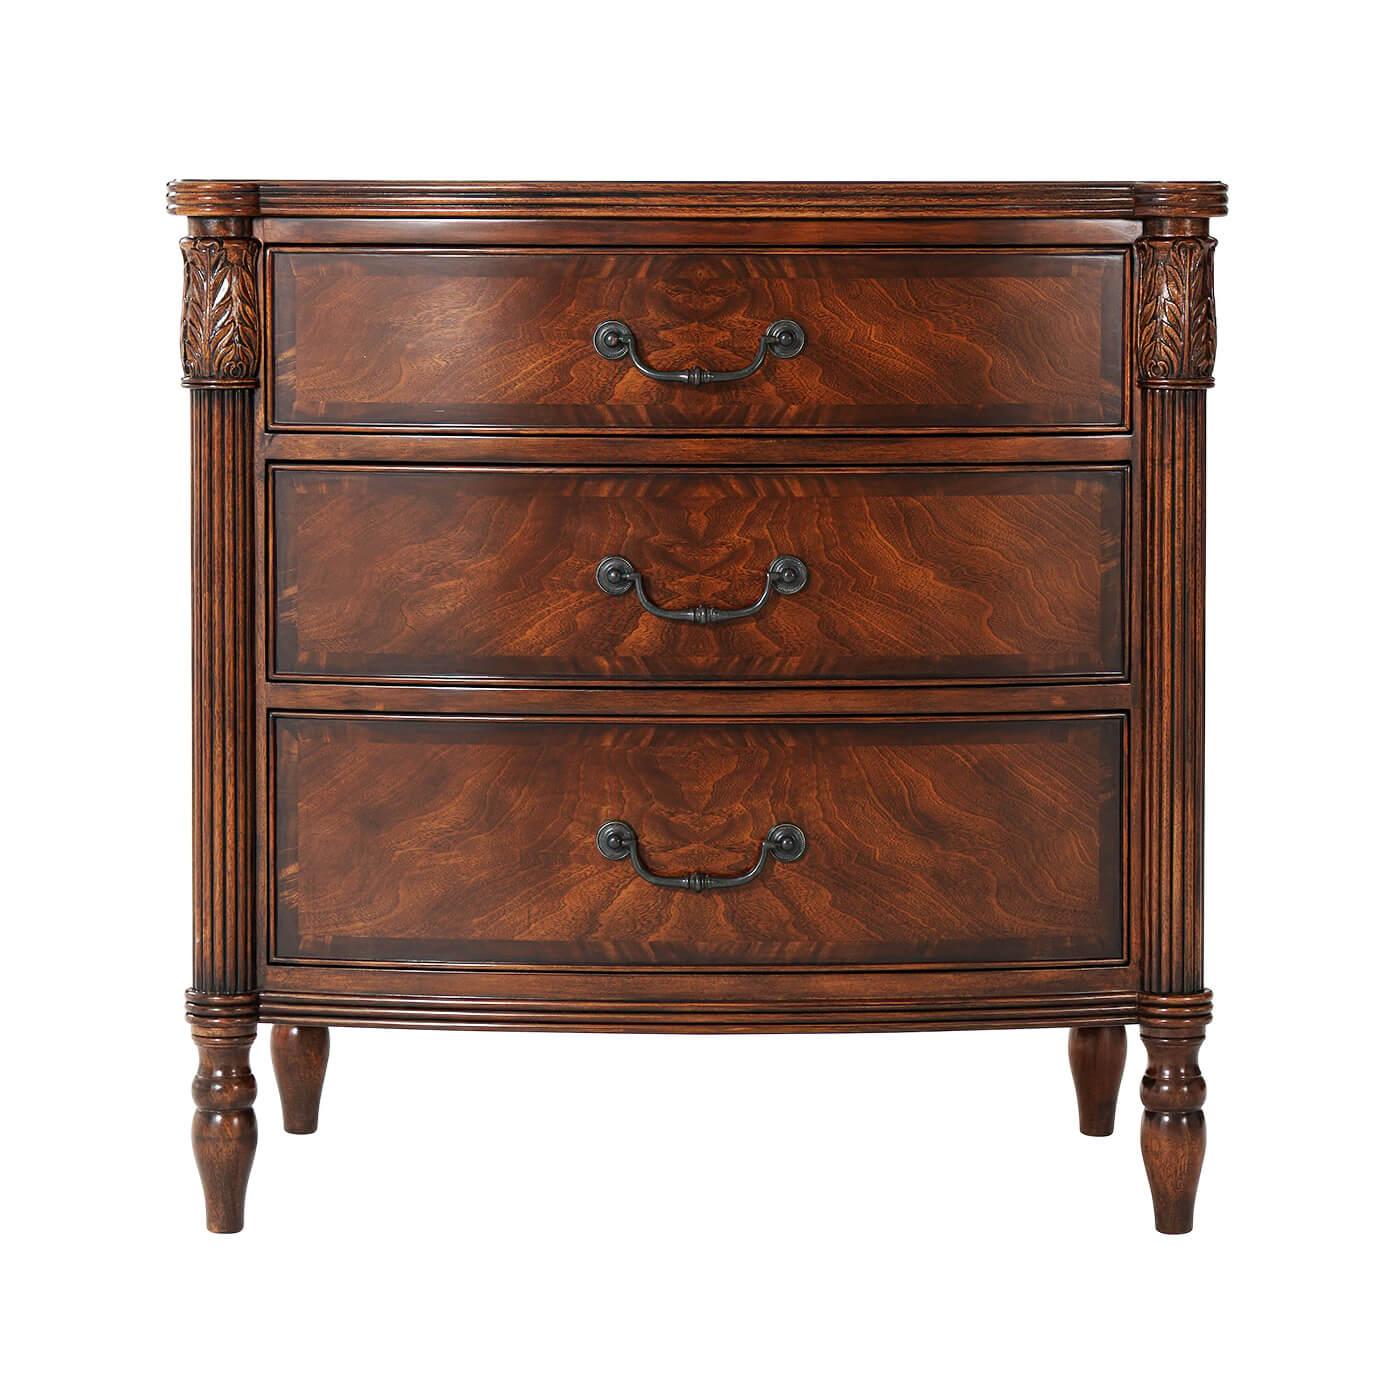 A mahogany and figured mahogany nightstand, the reeded edge bowfront top with protruding corners with leaf carved and reeded uprights, with three graduated drawers with verdigris brass handles, raised on turned legs. Inspired by a Federal Period